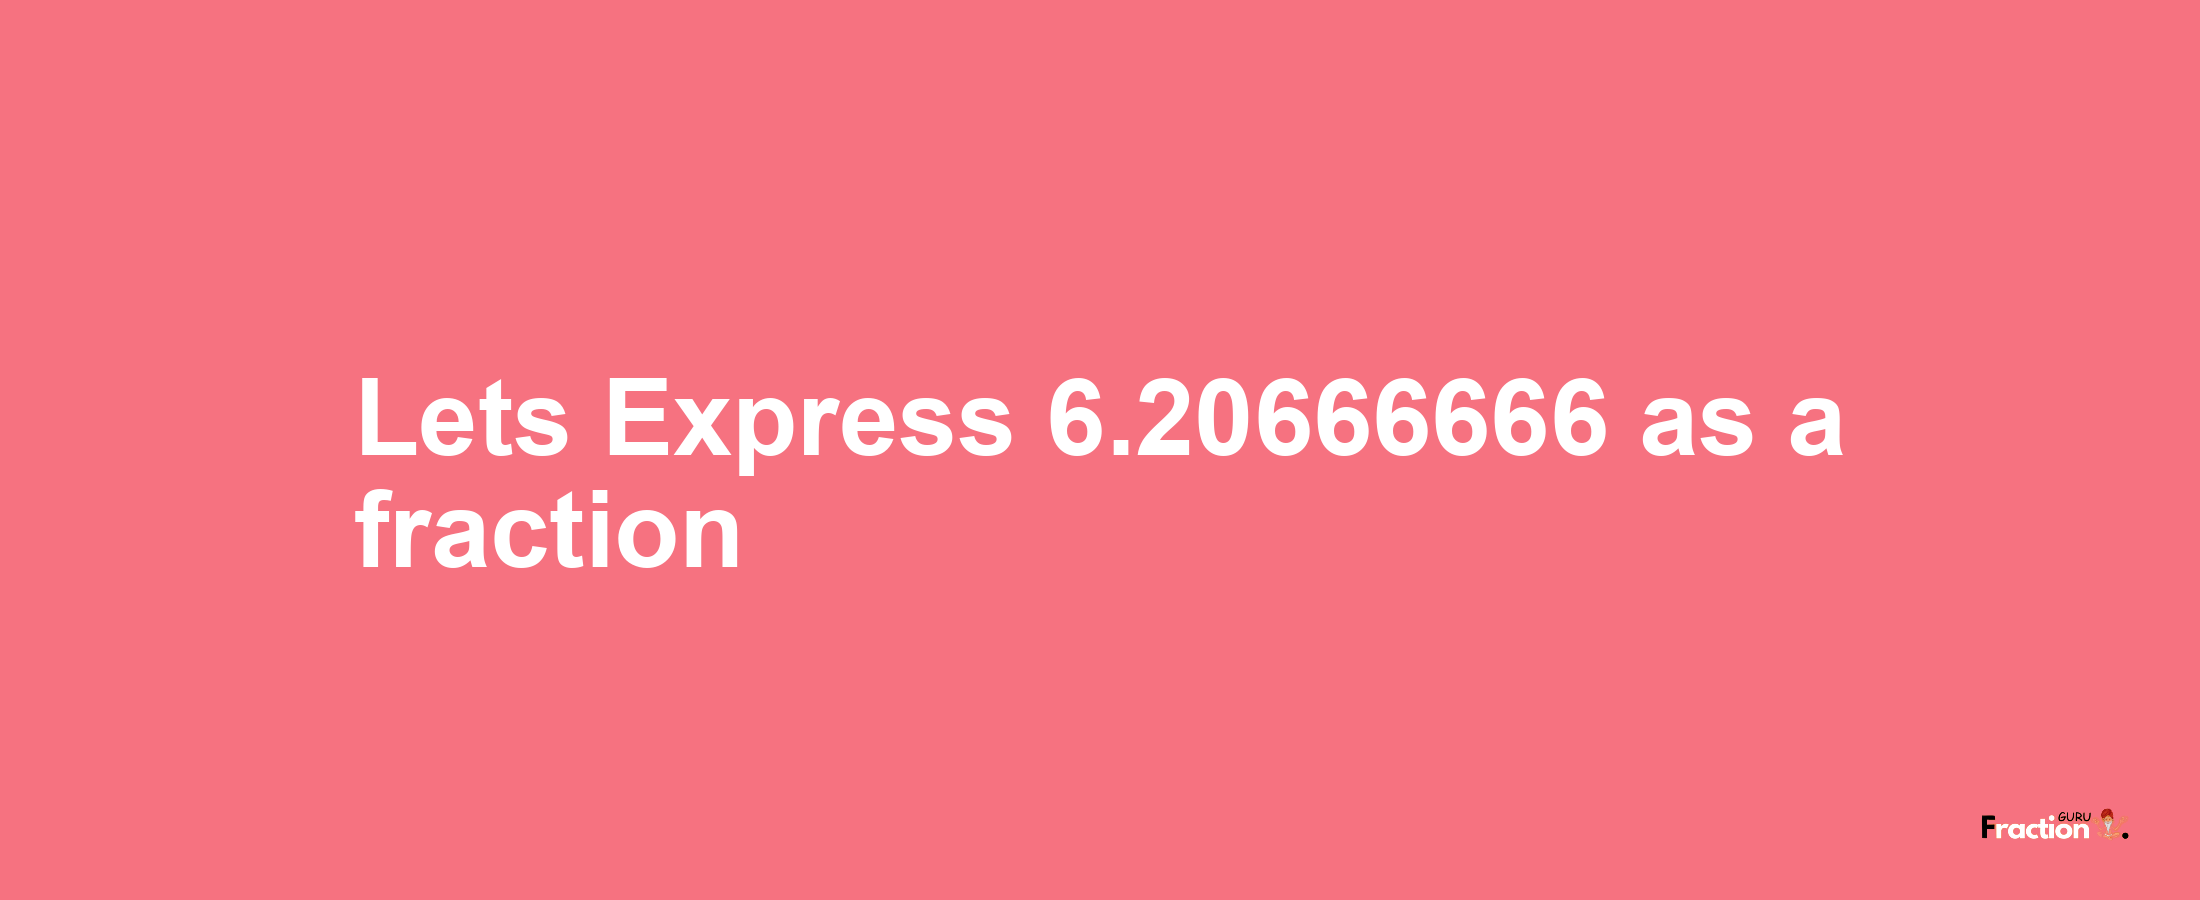 Lets Express 6.20666666 as afraction